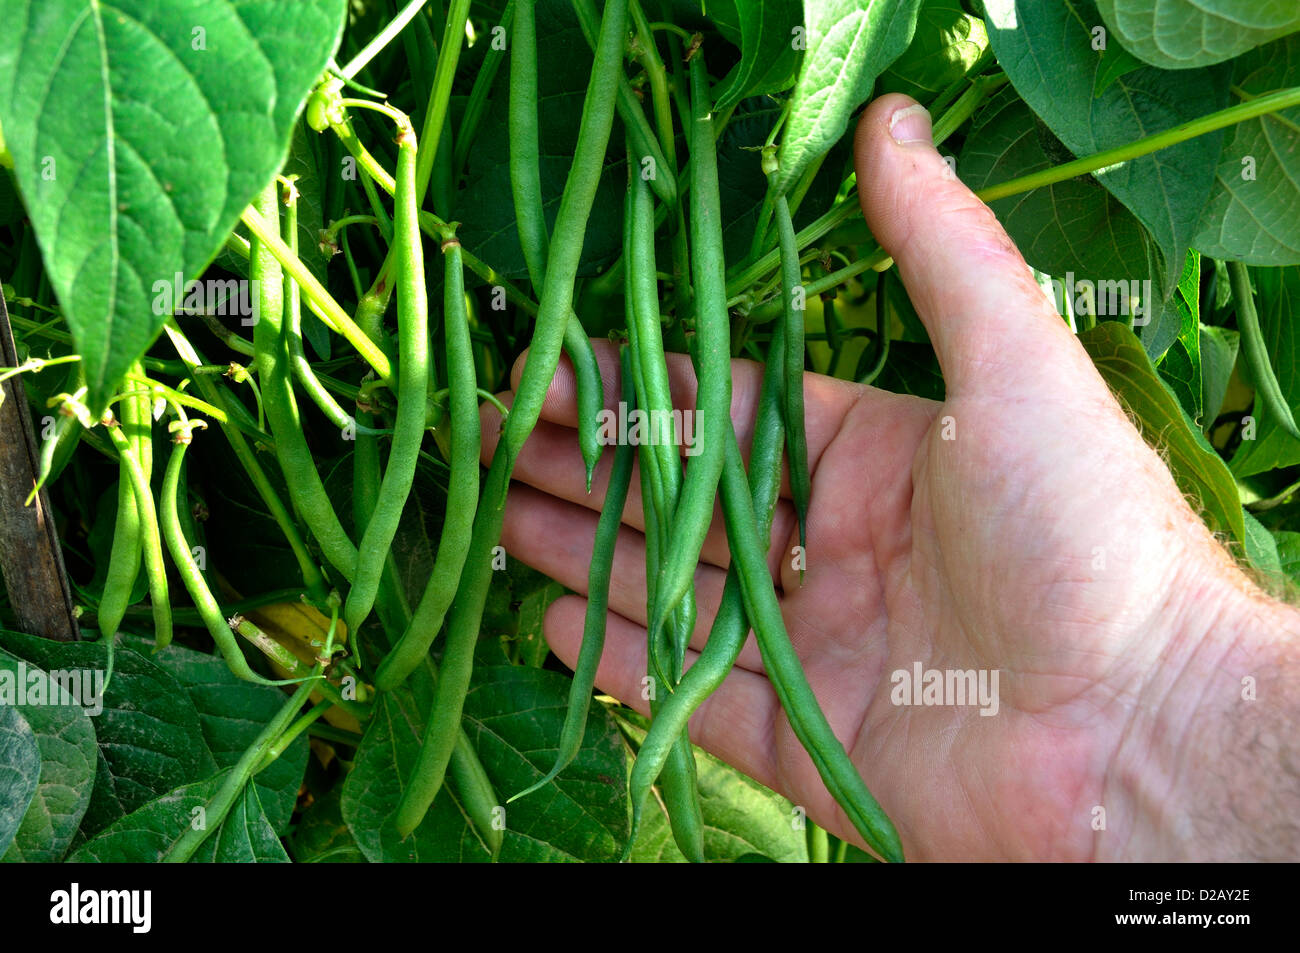 Harvesting green beans (Phaseolus vulgaris), in july. 'Potager de Suzanne', Le Pas, Mayenne, Loire country, France. Stock Photo